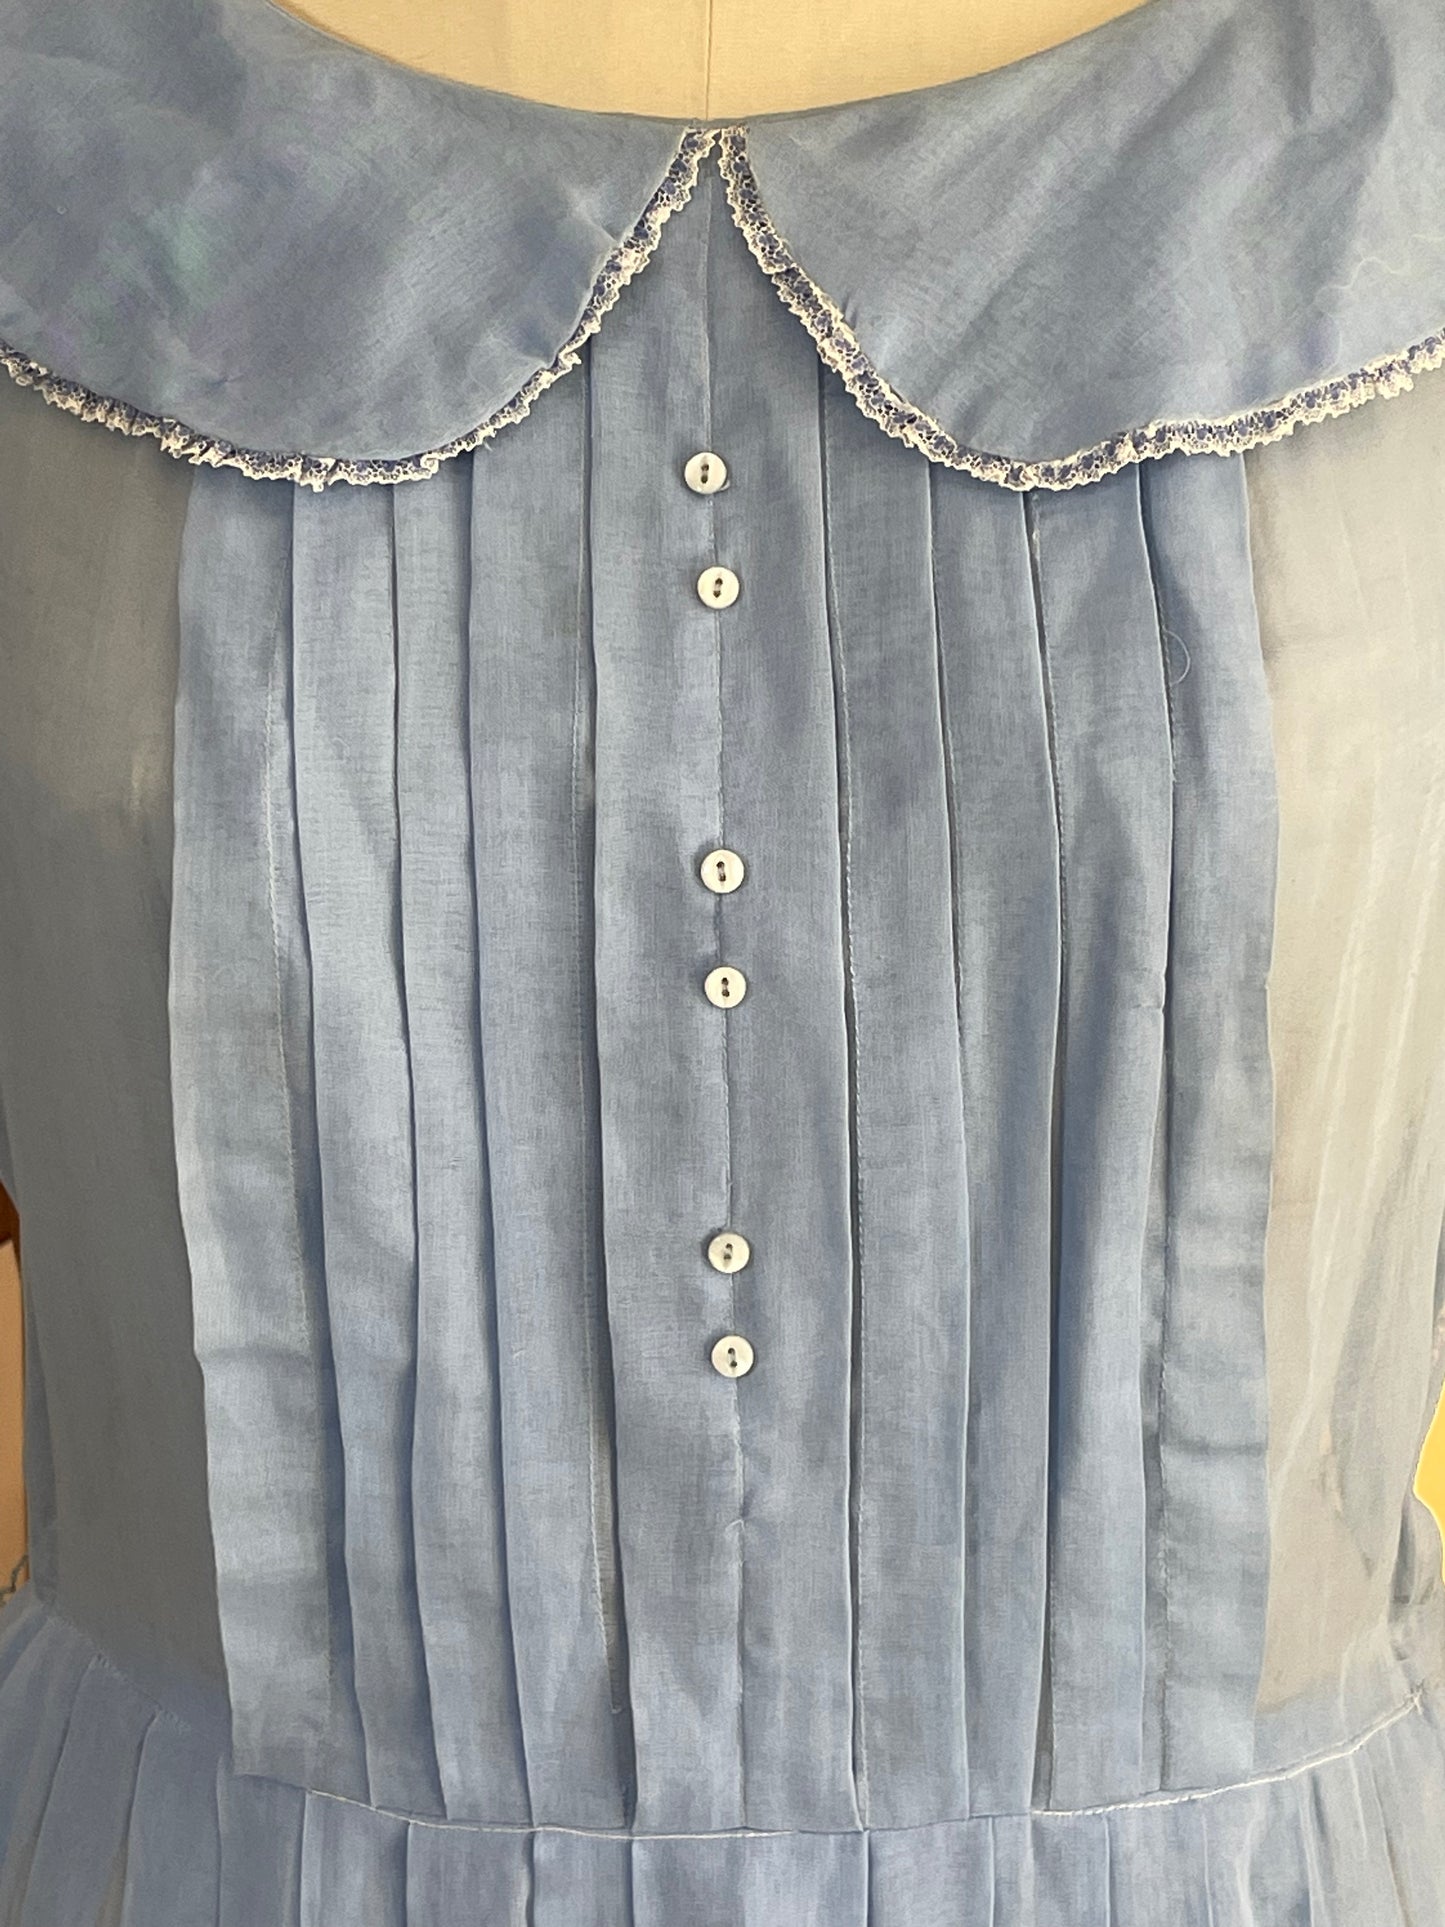 Blue Pleated Sheer Day Dress